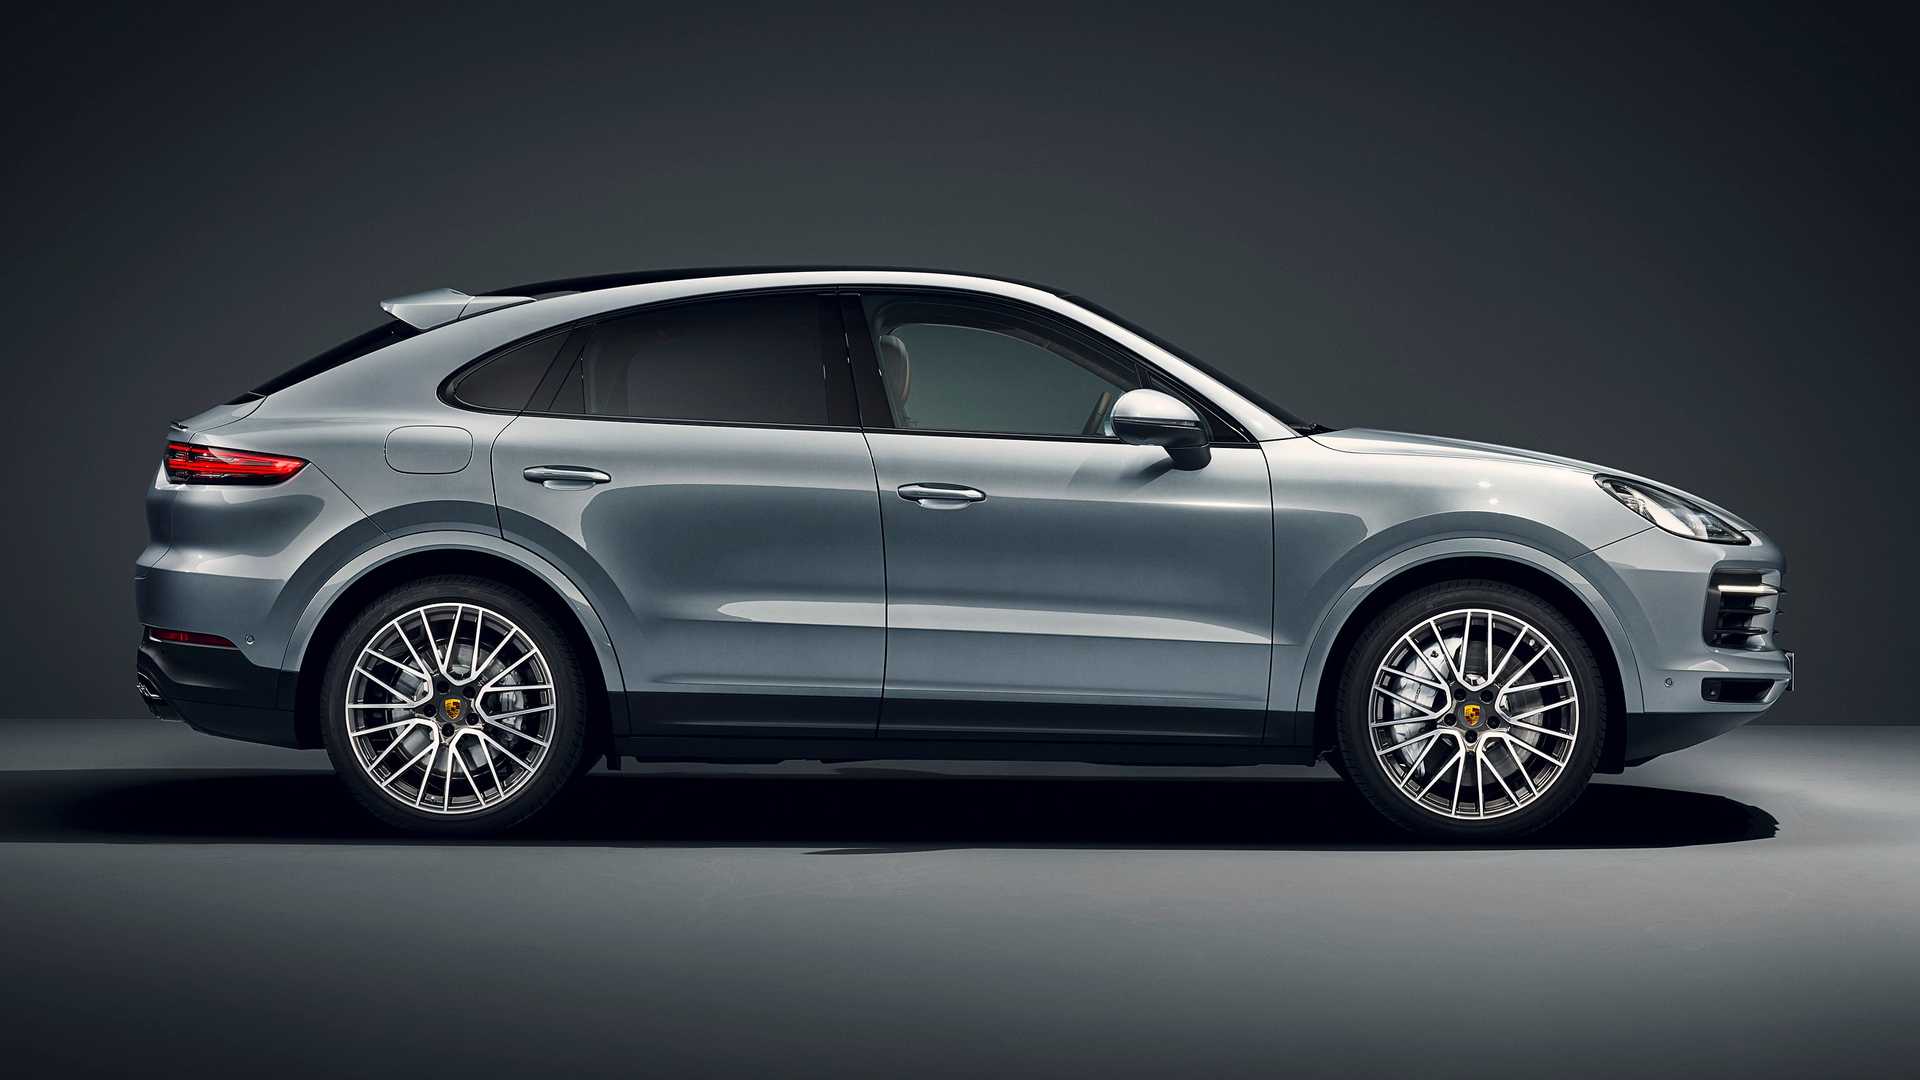 Chalk Porsche Cayenne Turbo Coupe Spotted at Dealer, Looks Smaller ...